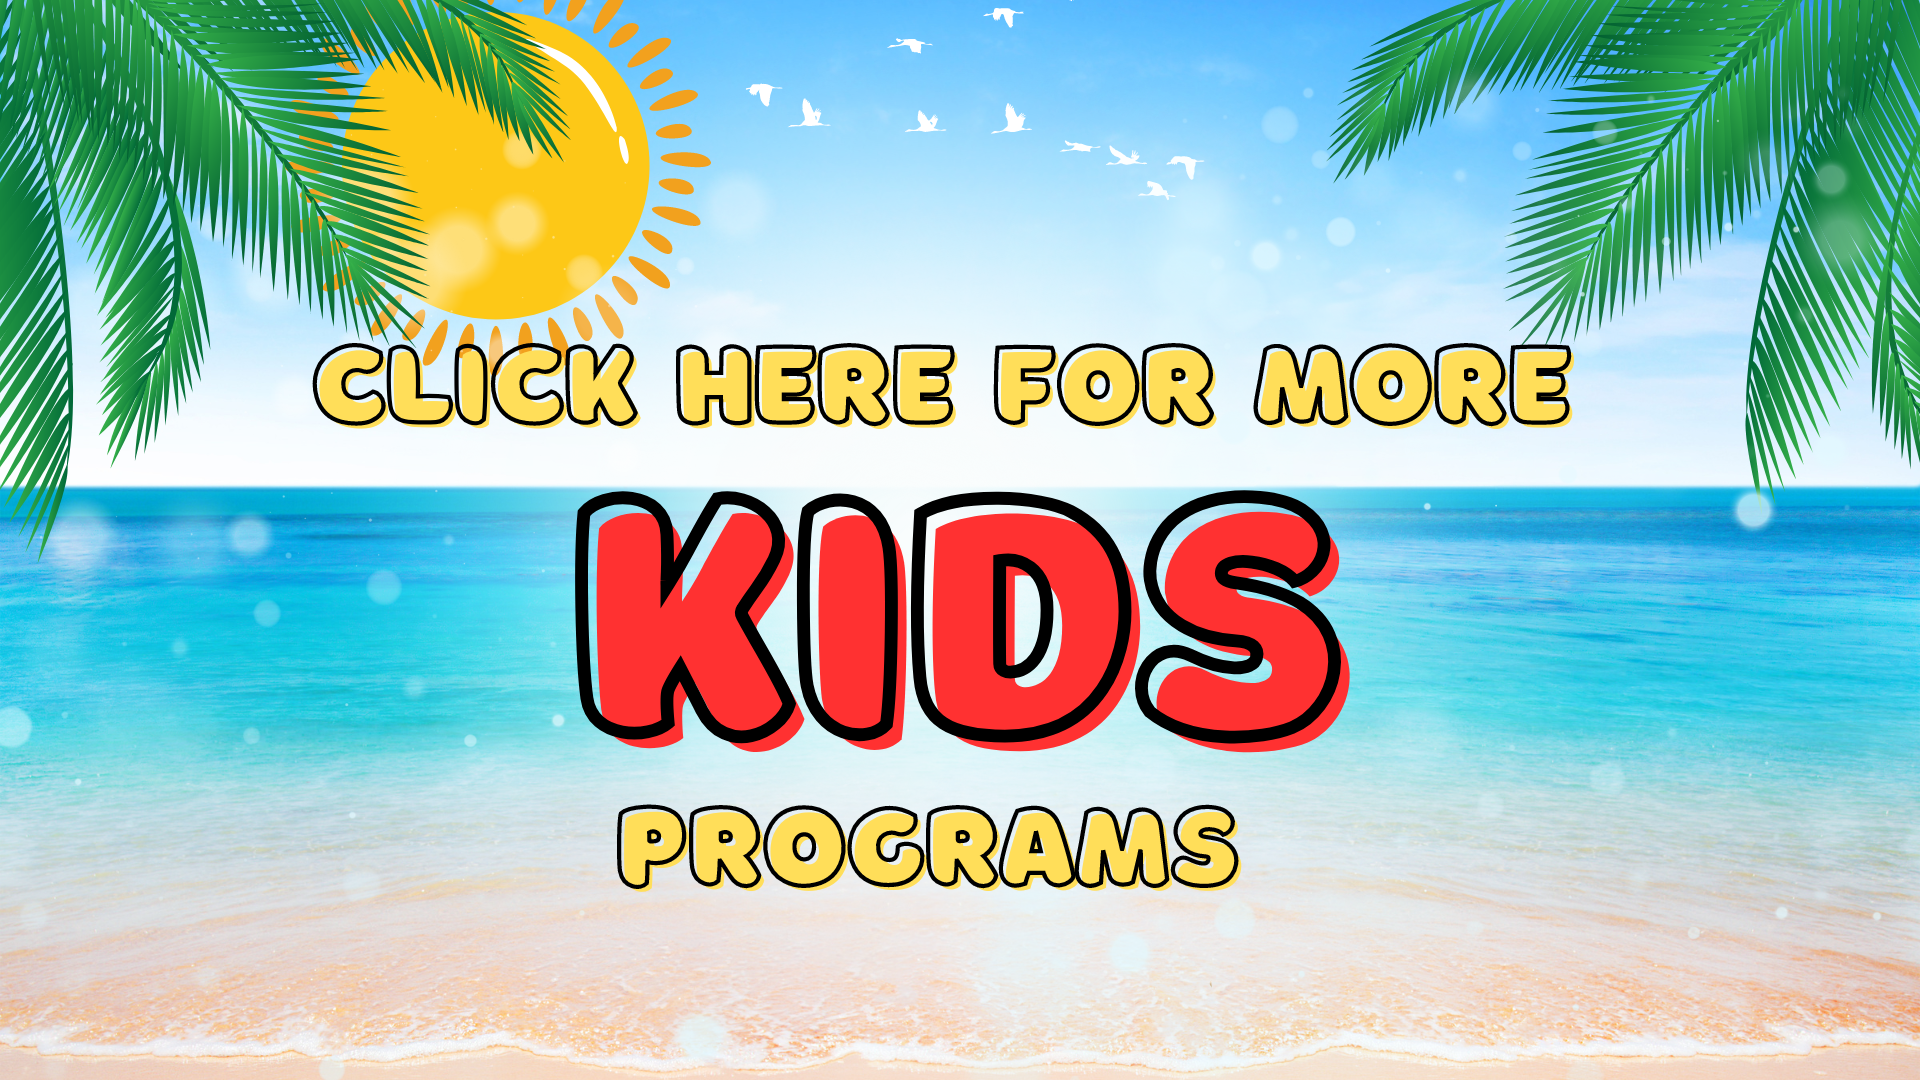 Click Here for more kid's programs